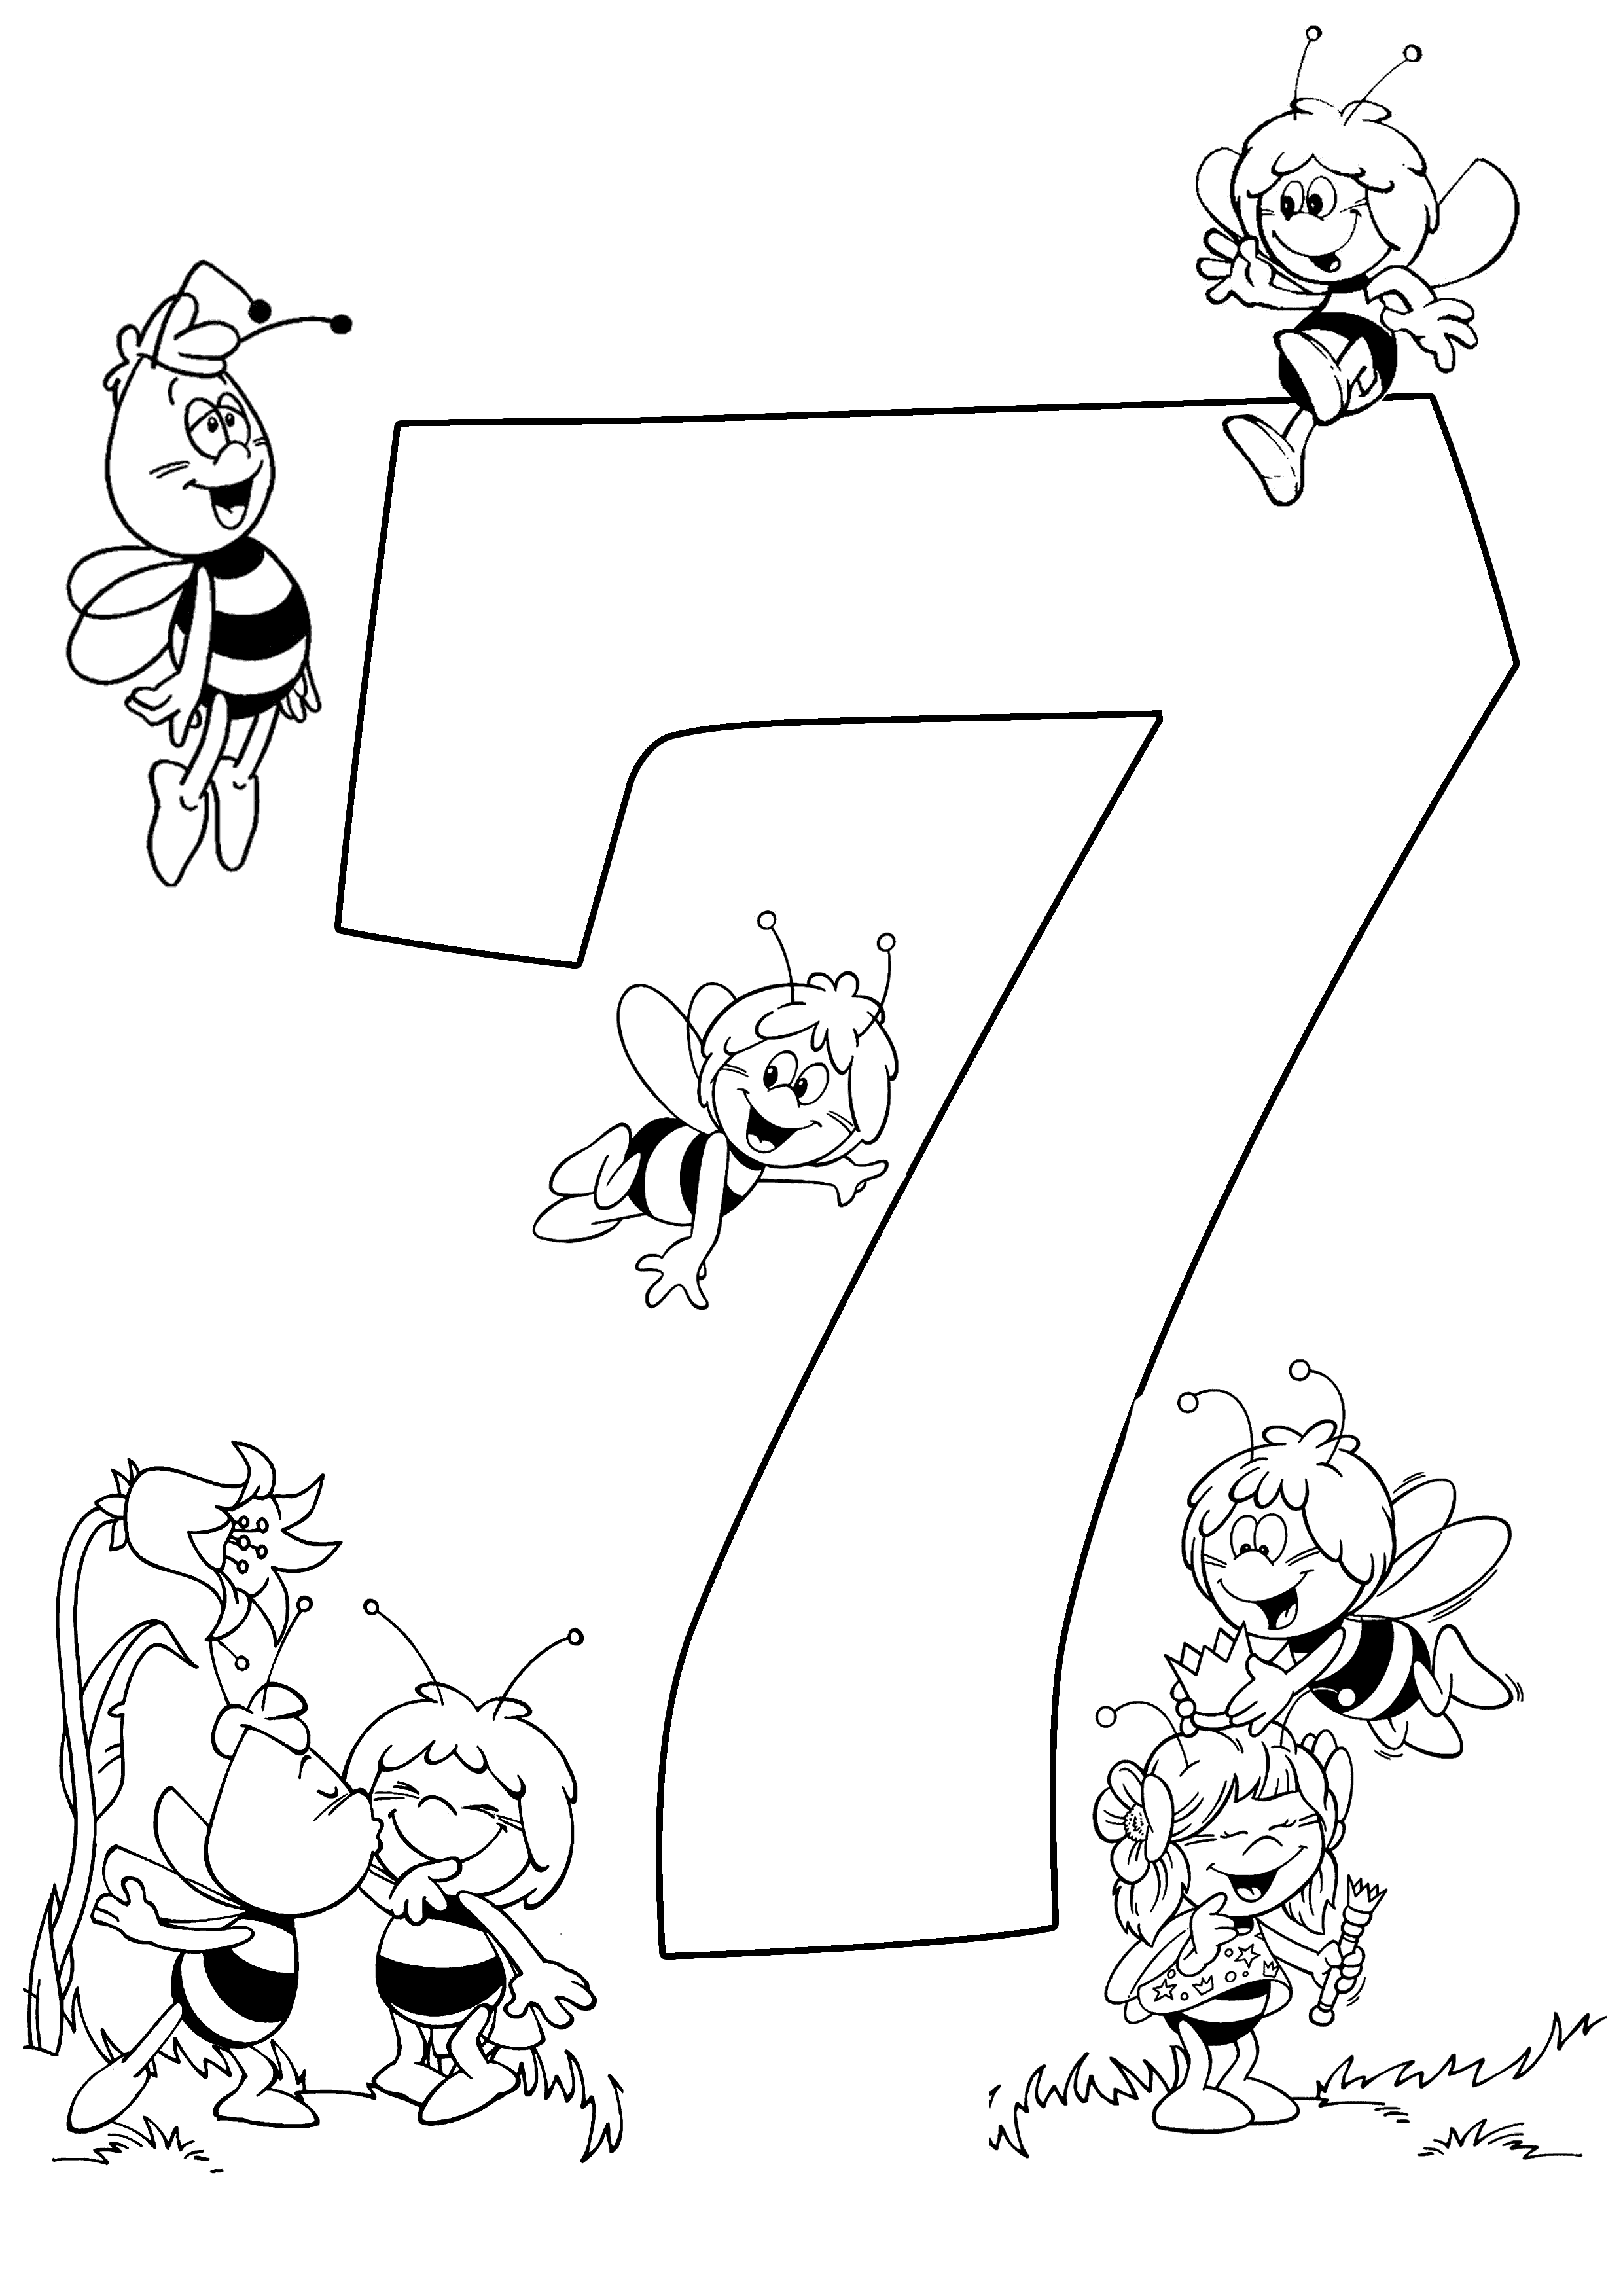 Free Printable Numbers Coloring Pages